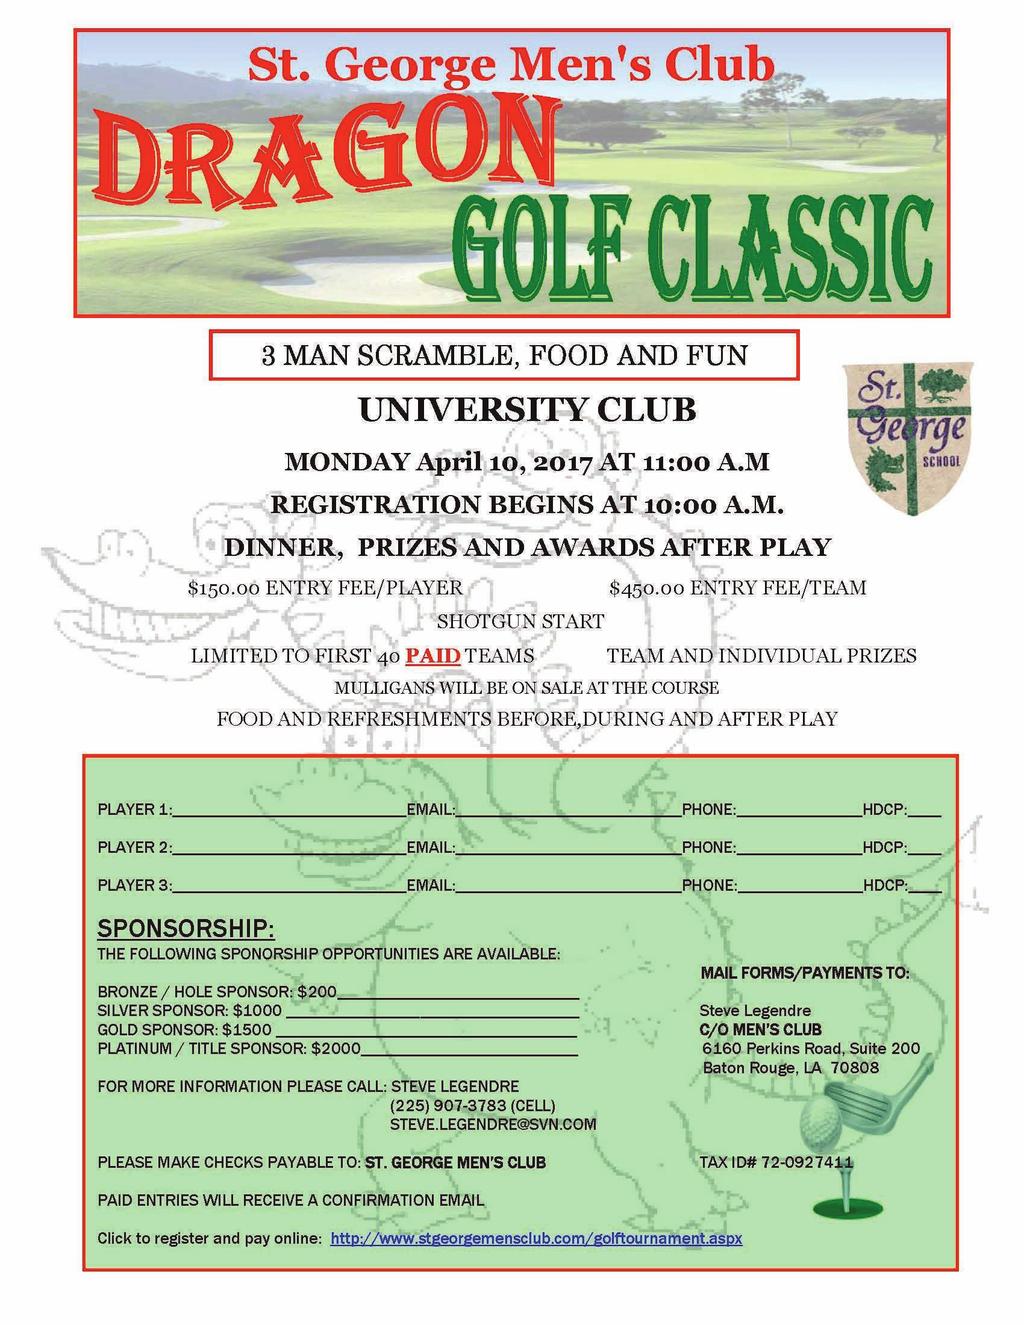 Register and pay online at http://www.stgeorgemensclub.com/golftournament.aspx. Social Responsibilit C B 2017- S, A 8 W N Y! St.